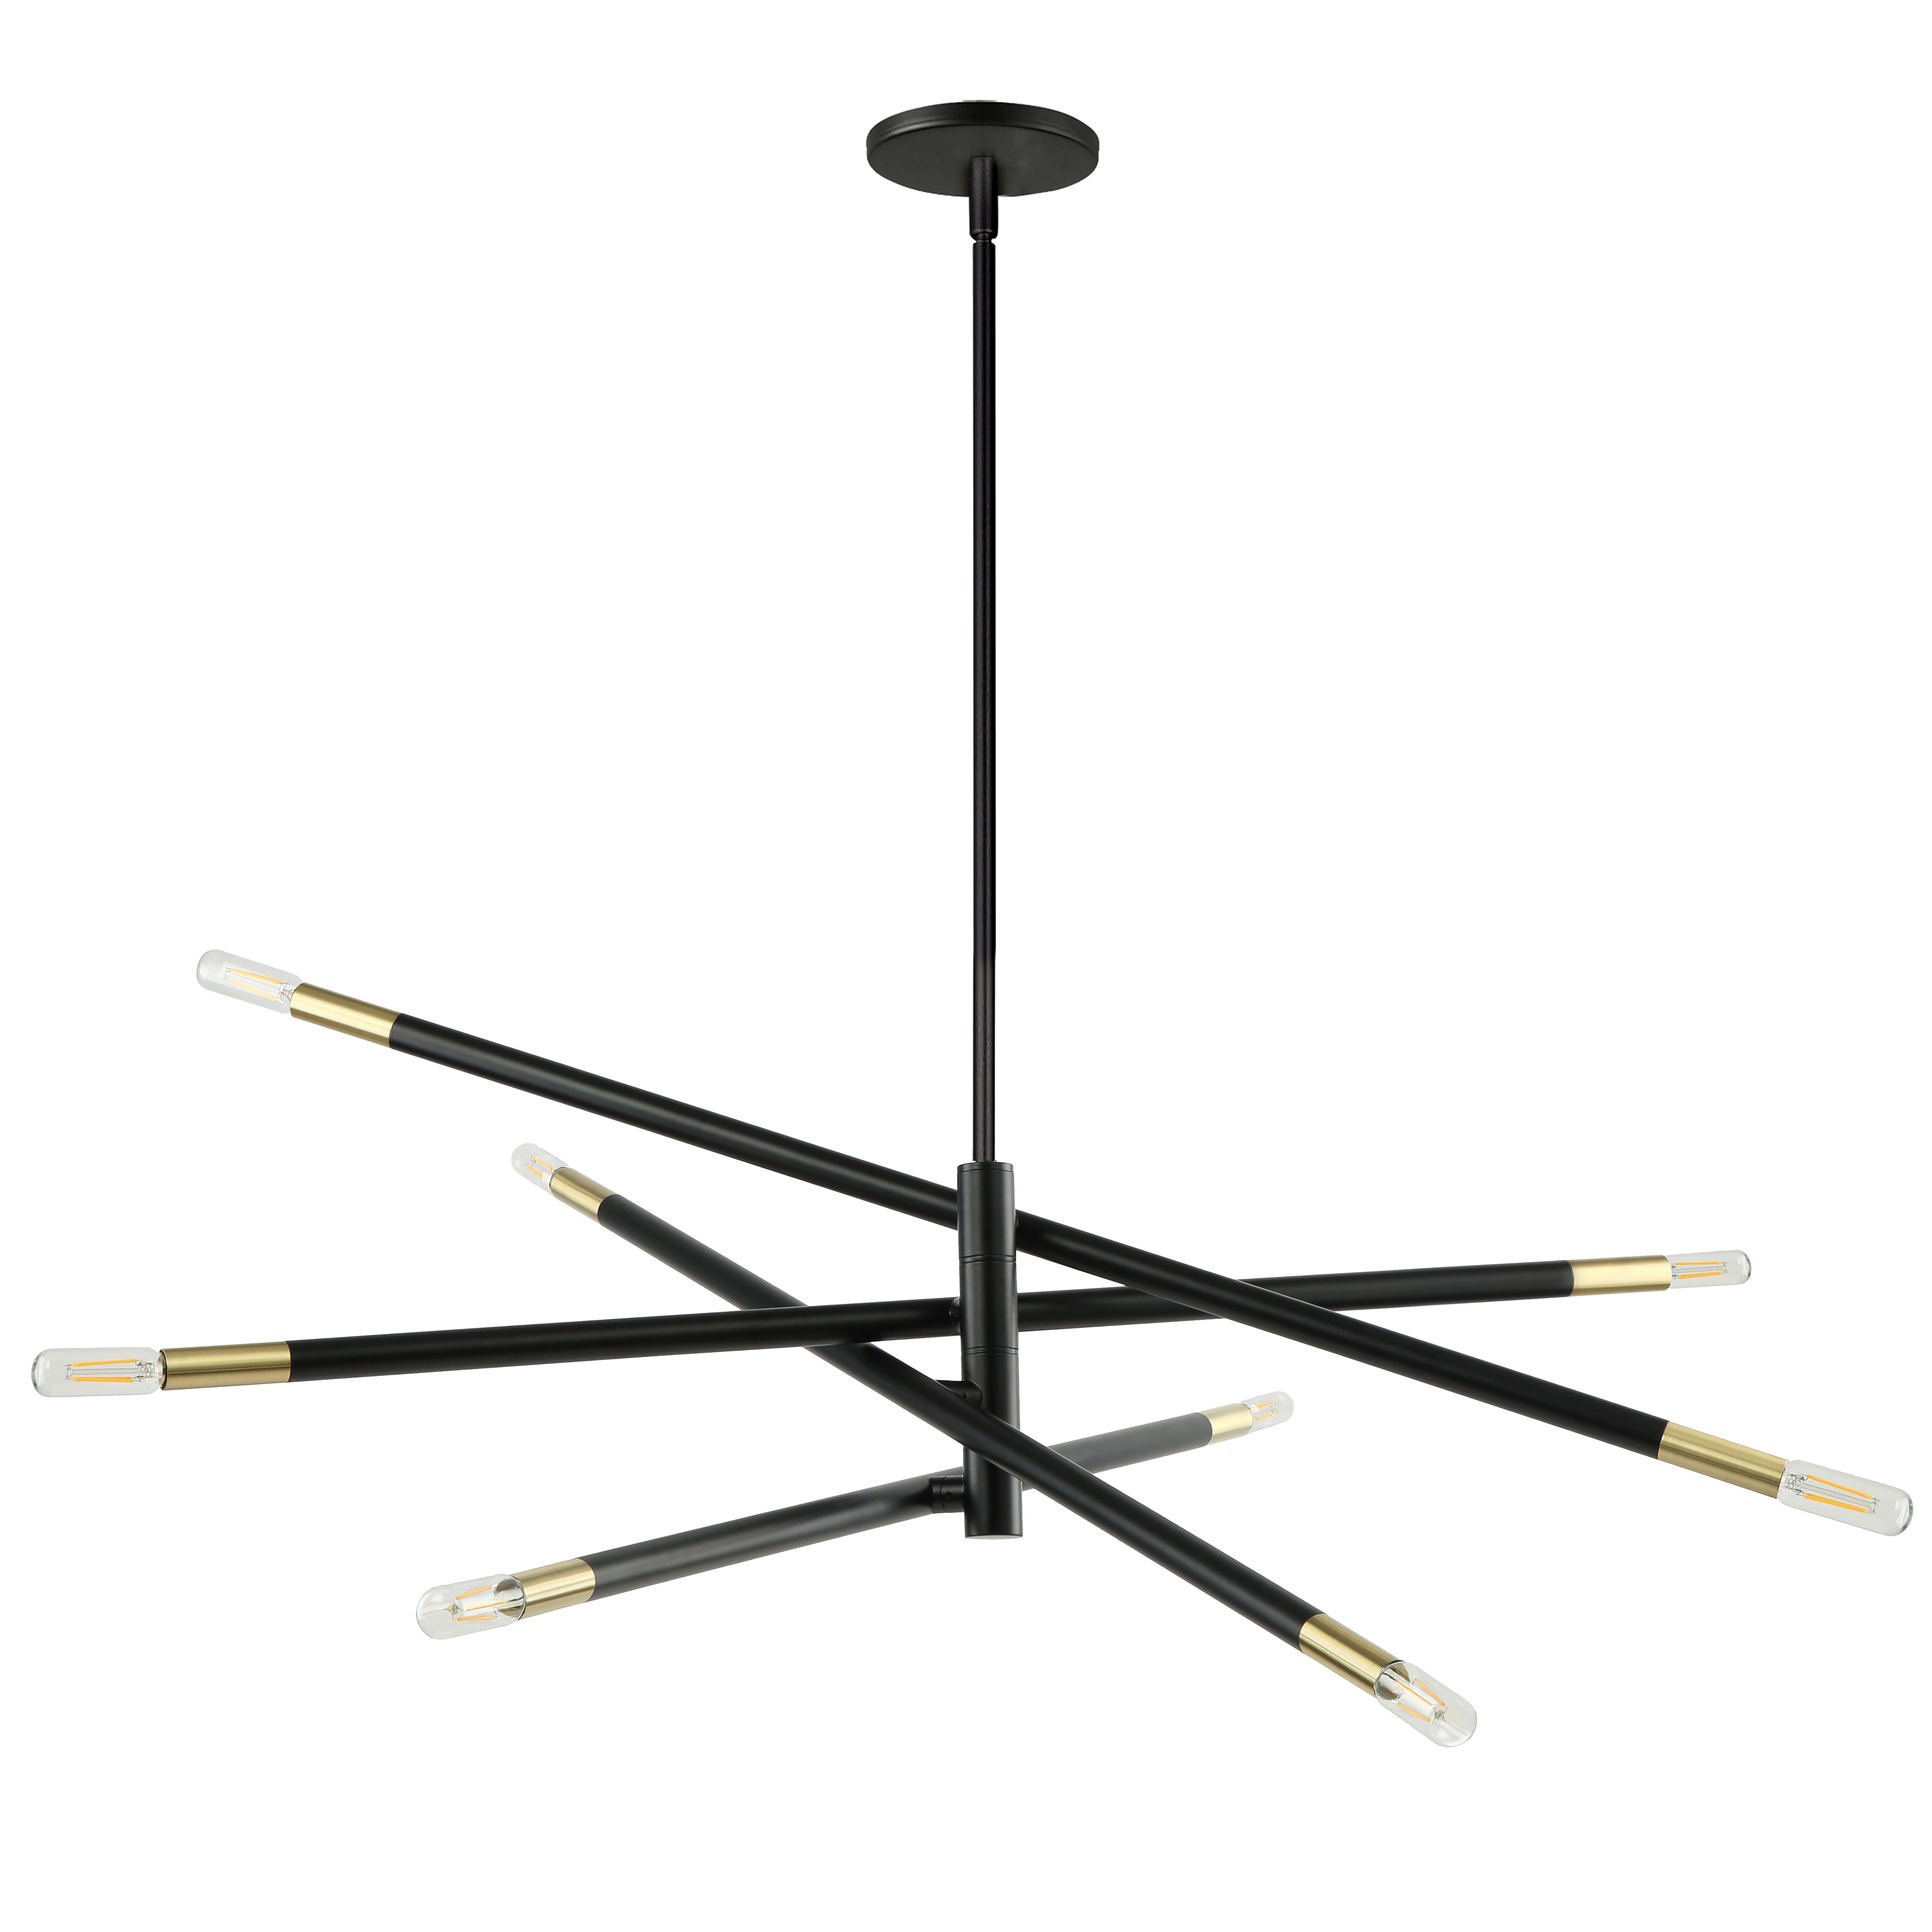 The Wand family of lighting is based on a beautifully simple concept  classic linear design. The look is modern, but with a nod to the traditional motifs of mid-century modernism and even early 20th century forms. The frame is crafted in metal with either straight or elegantly curved arms in stylish matte black finish with optional aged brass accents. It's a look with inherent drama and adds a note of undeniable luxury to your fashionable modern neutrals or bright palette. Wand lighting is versatile, and suitable for most rooms of your home from the foyer to bedroom.